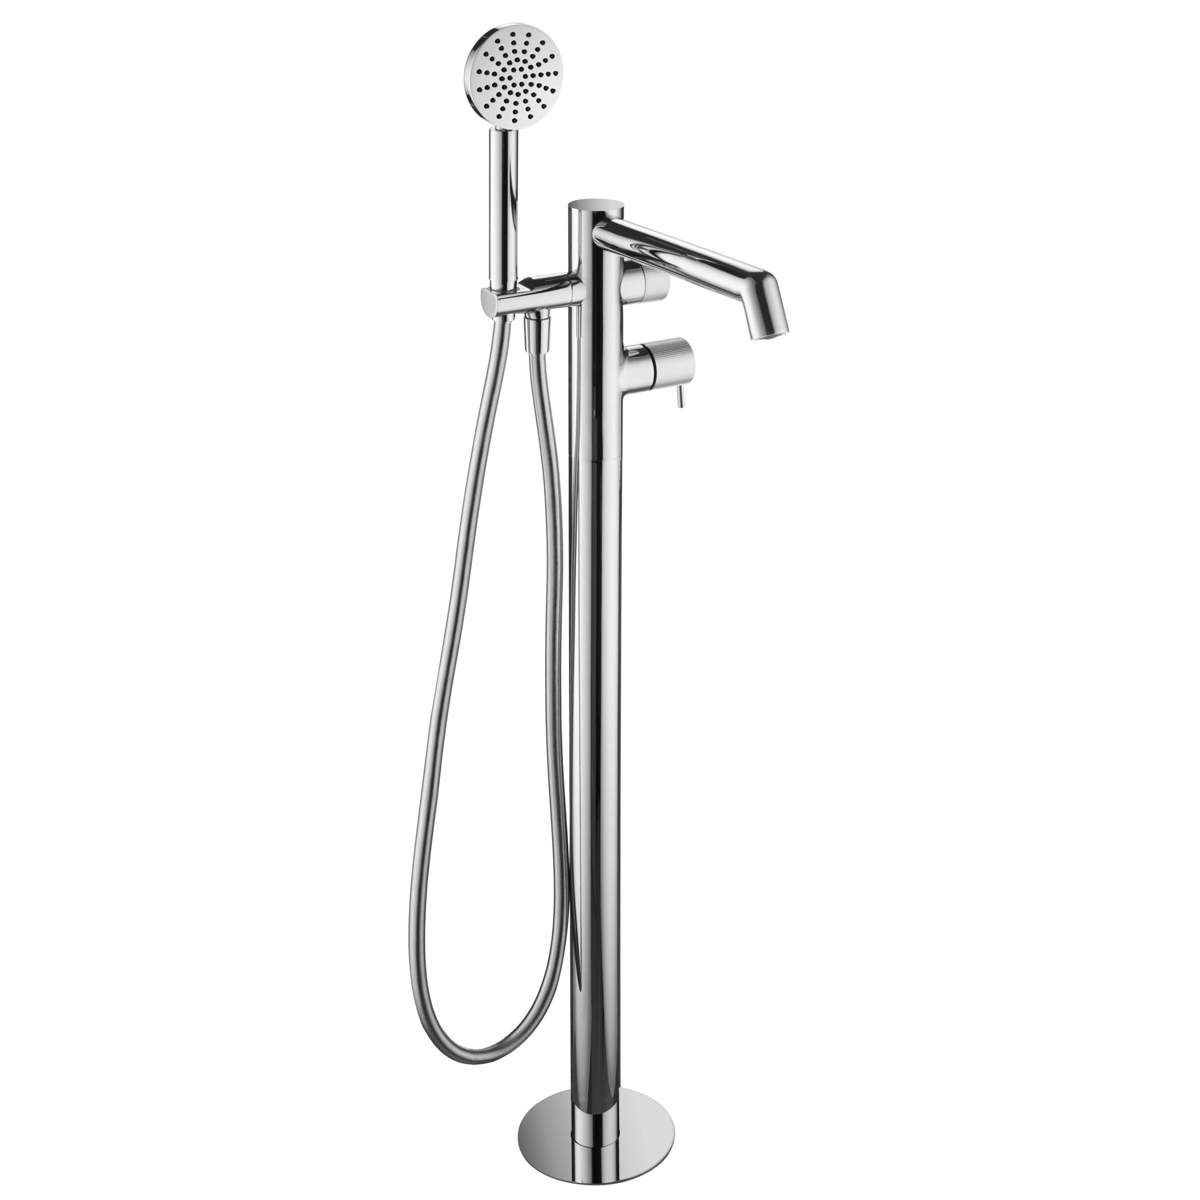 JTP Evo Chrome Floor Standing Bath Shower Mixer with Lever and Kit (LH64534CH)